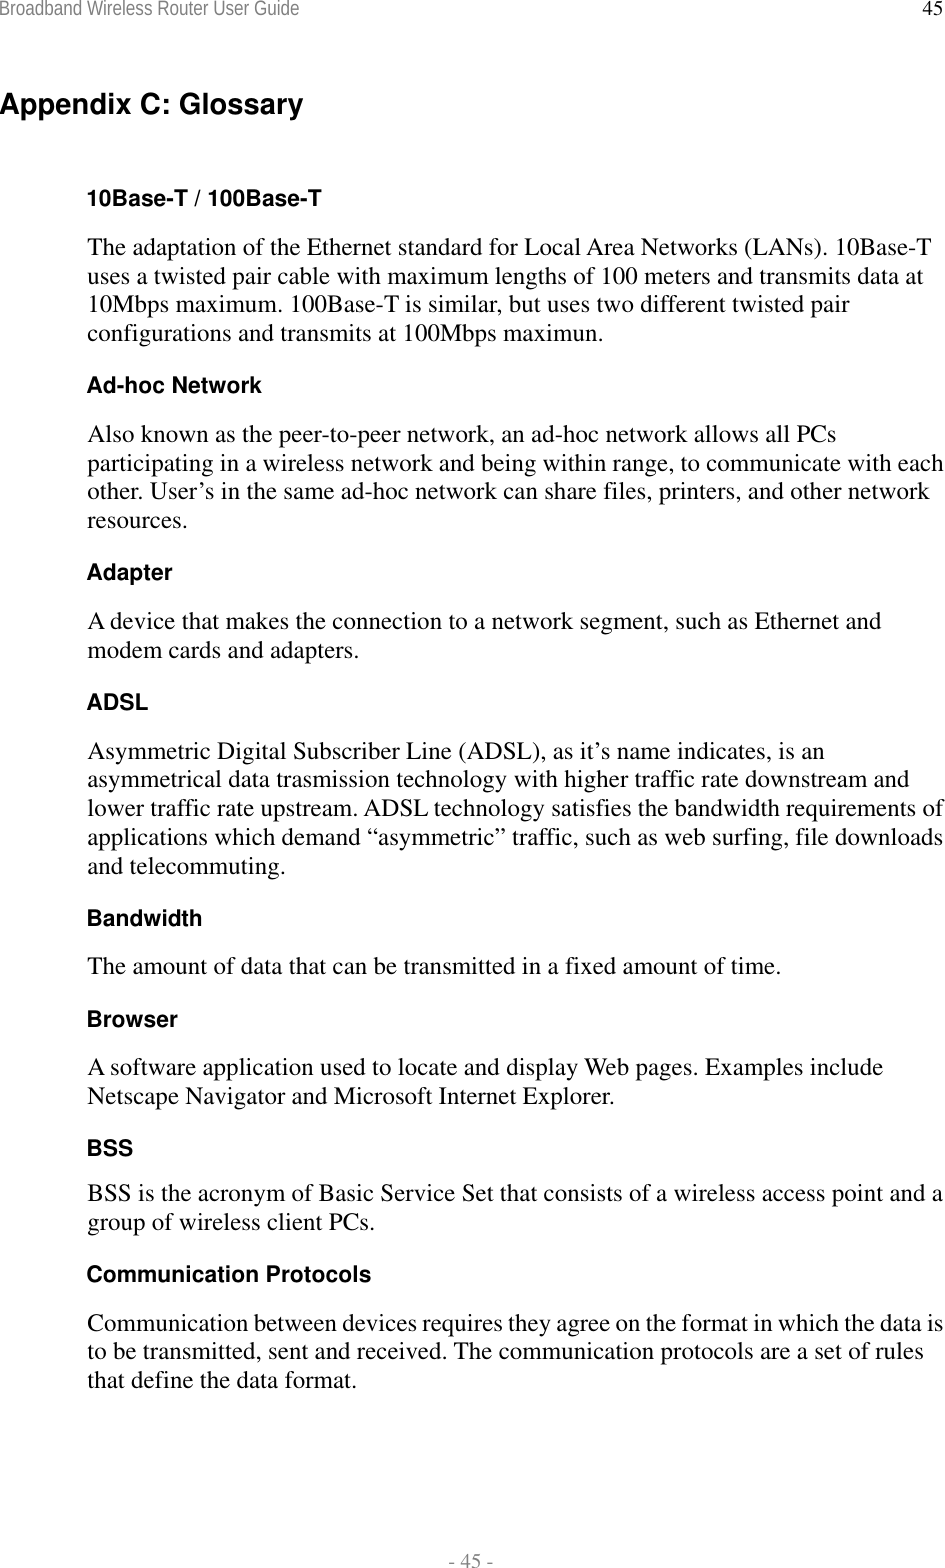 Broadband Wireless Router User Guide  - 45 - 45Appendix C: Glossary  10Base-T / 100Base-T The adaptation of the Ethernet standard for Local Area Networks (LANs). 10Base-T uses a twisted pair cable with maximum lengths of 100 meters and transmits data at 10Mbps maximum. 100Base-T is similar, but uses two different twisted pair configurations and transmits at 100Mbps maximun. Ad-hoc Network Also known as the peer-to-peer network, an ad-hoc network allows all PCs participating in a wireless network and being within range, to communicate with each other. User’s in the same ad-hoc network can share files, printers, and other network resources. Adapter A device that makes the connection to a network segment, such as Ethernet and modem cards and adapters. ADSL Asymmetric Digital Subscriber Line (ADSL), as it’s name indicates, is an asymmetrical data trasmission technology with higher traffic rate downstream and lower traffic rate upstream. ADSL technology satisfies the bandwidth requirements of applications which demand “asymmetric” traffic, such as web surfing, file downloads and telecommuting. Bandwidth The amount of data that can be transmitted in a fixed amount of time. Browser A software application used to locate and display Web pages. Examples include Netscape Navigator and Microsoft Internet Explorer. BSS BSS is the acronym of Basic Service Set that consists of a wireless access point and a group of wireless client PCs.  Communication Protocols Communication between devices requires they agree on the format in which the data is to be transmitted, sent and received. The communication protocols are a set of rules that define the data format. 